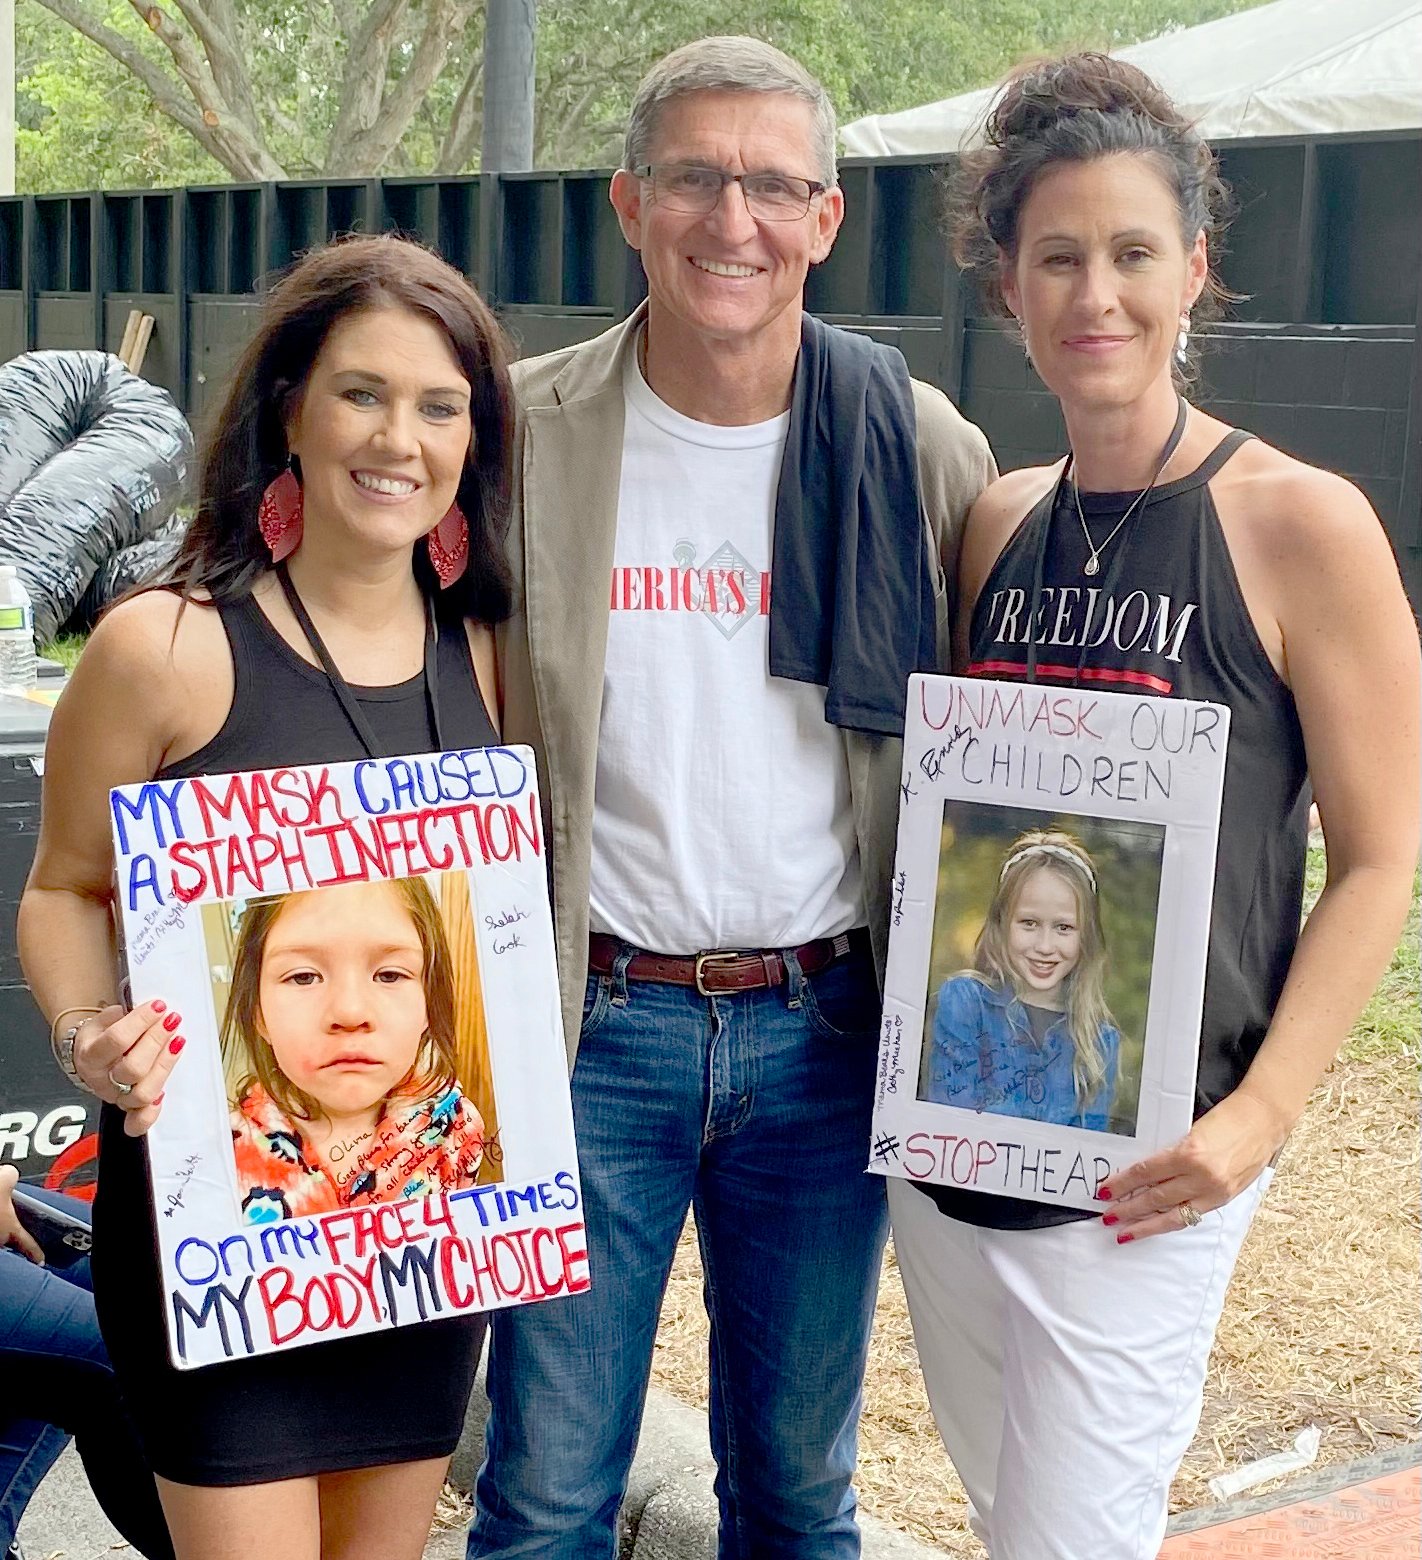 Emily, Kimberly, and General Flynn